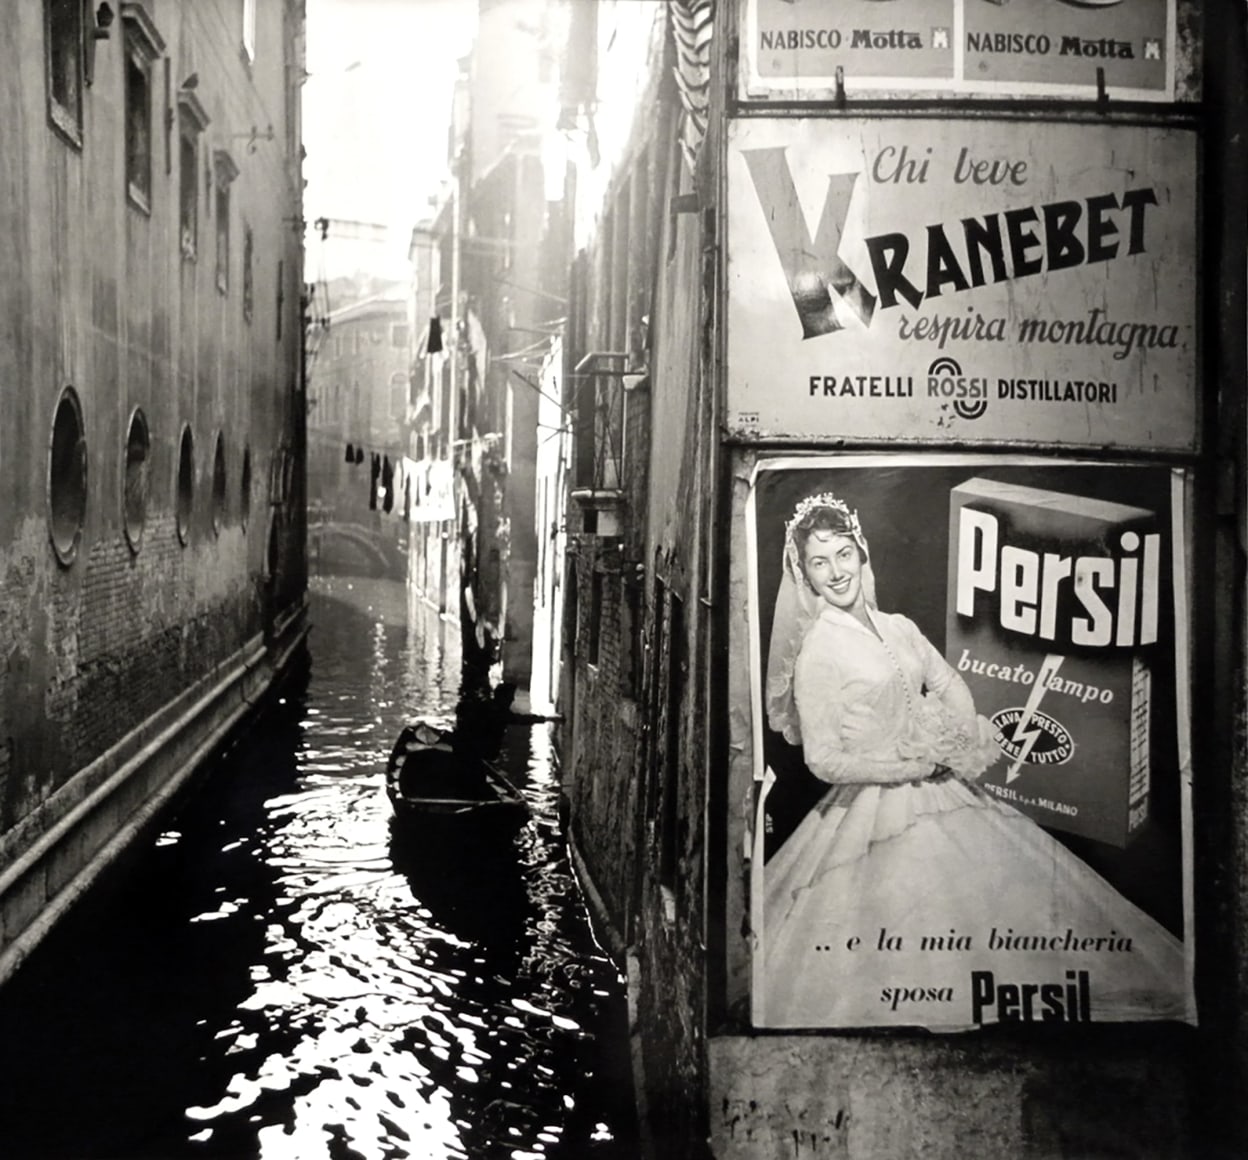 Nino Migliori, Venice, 1958. A canal with one boat running between buildings. Advertisements on the right.